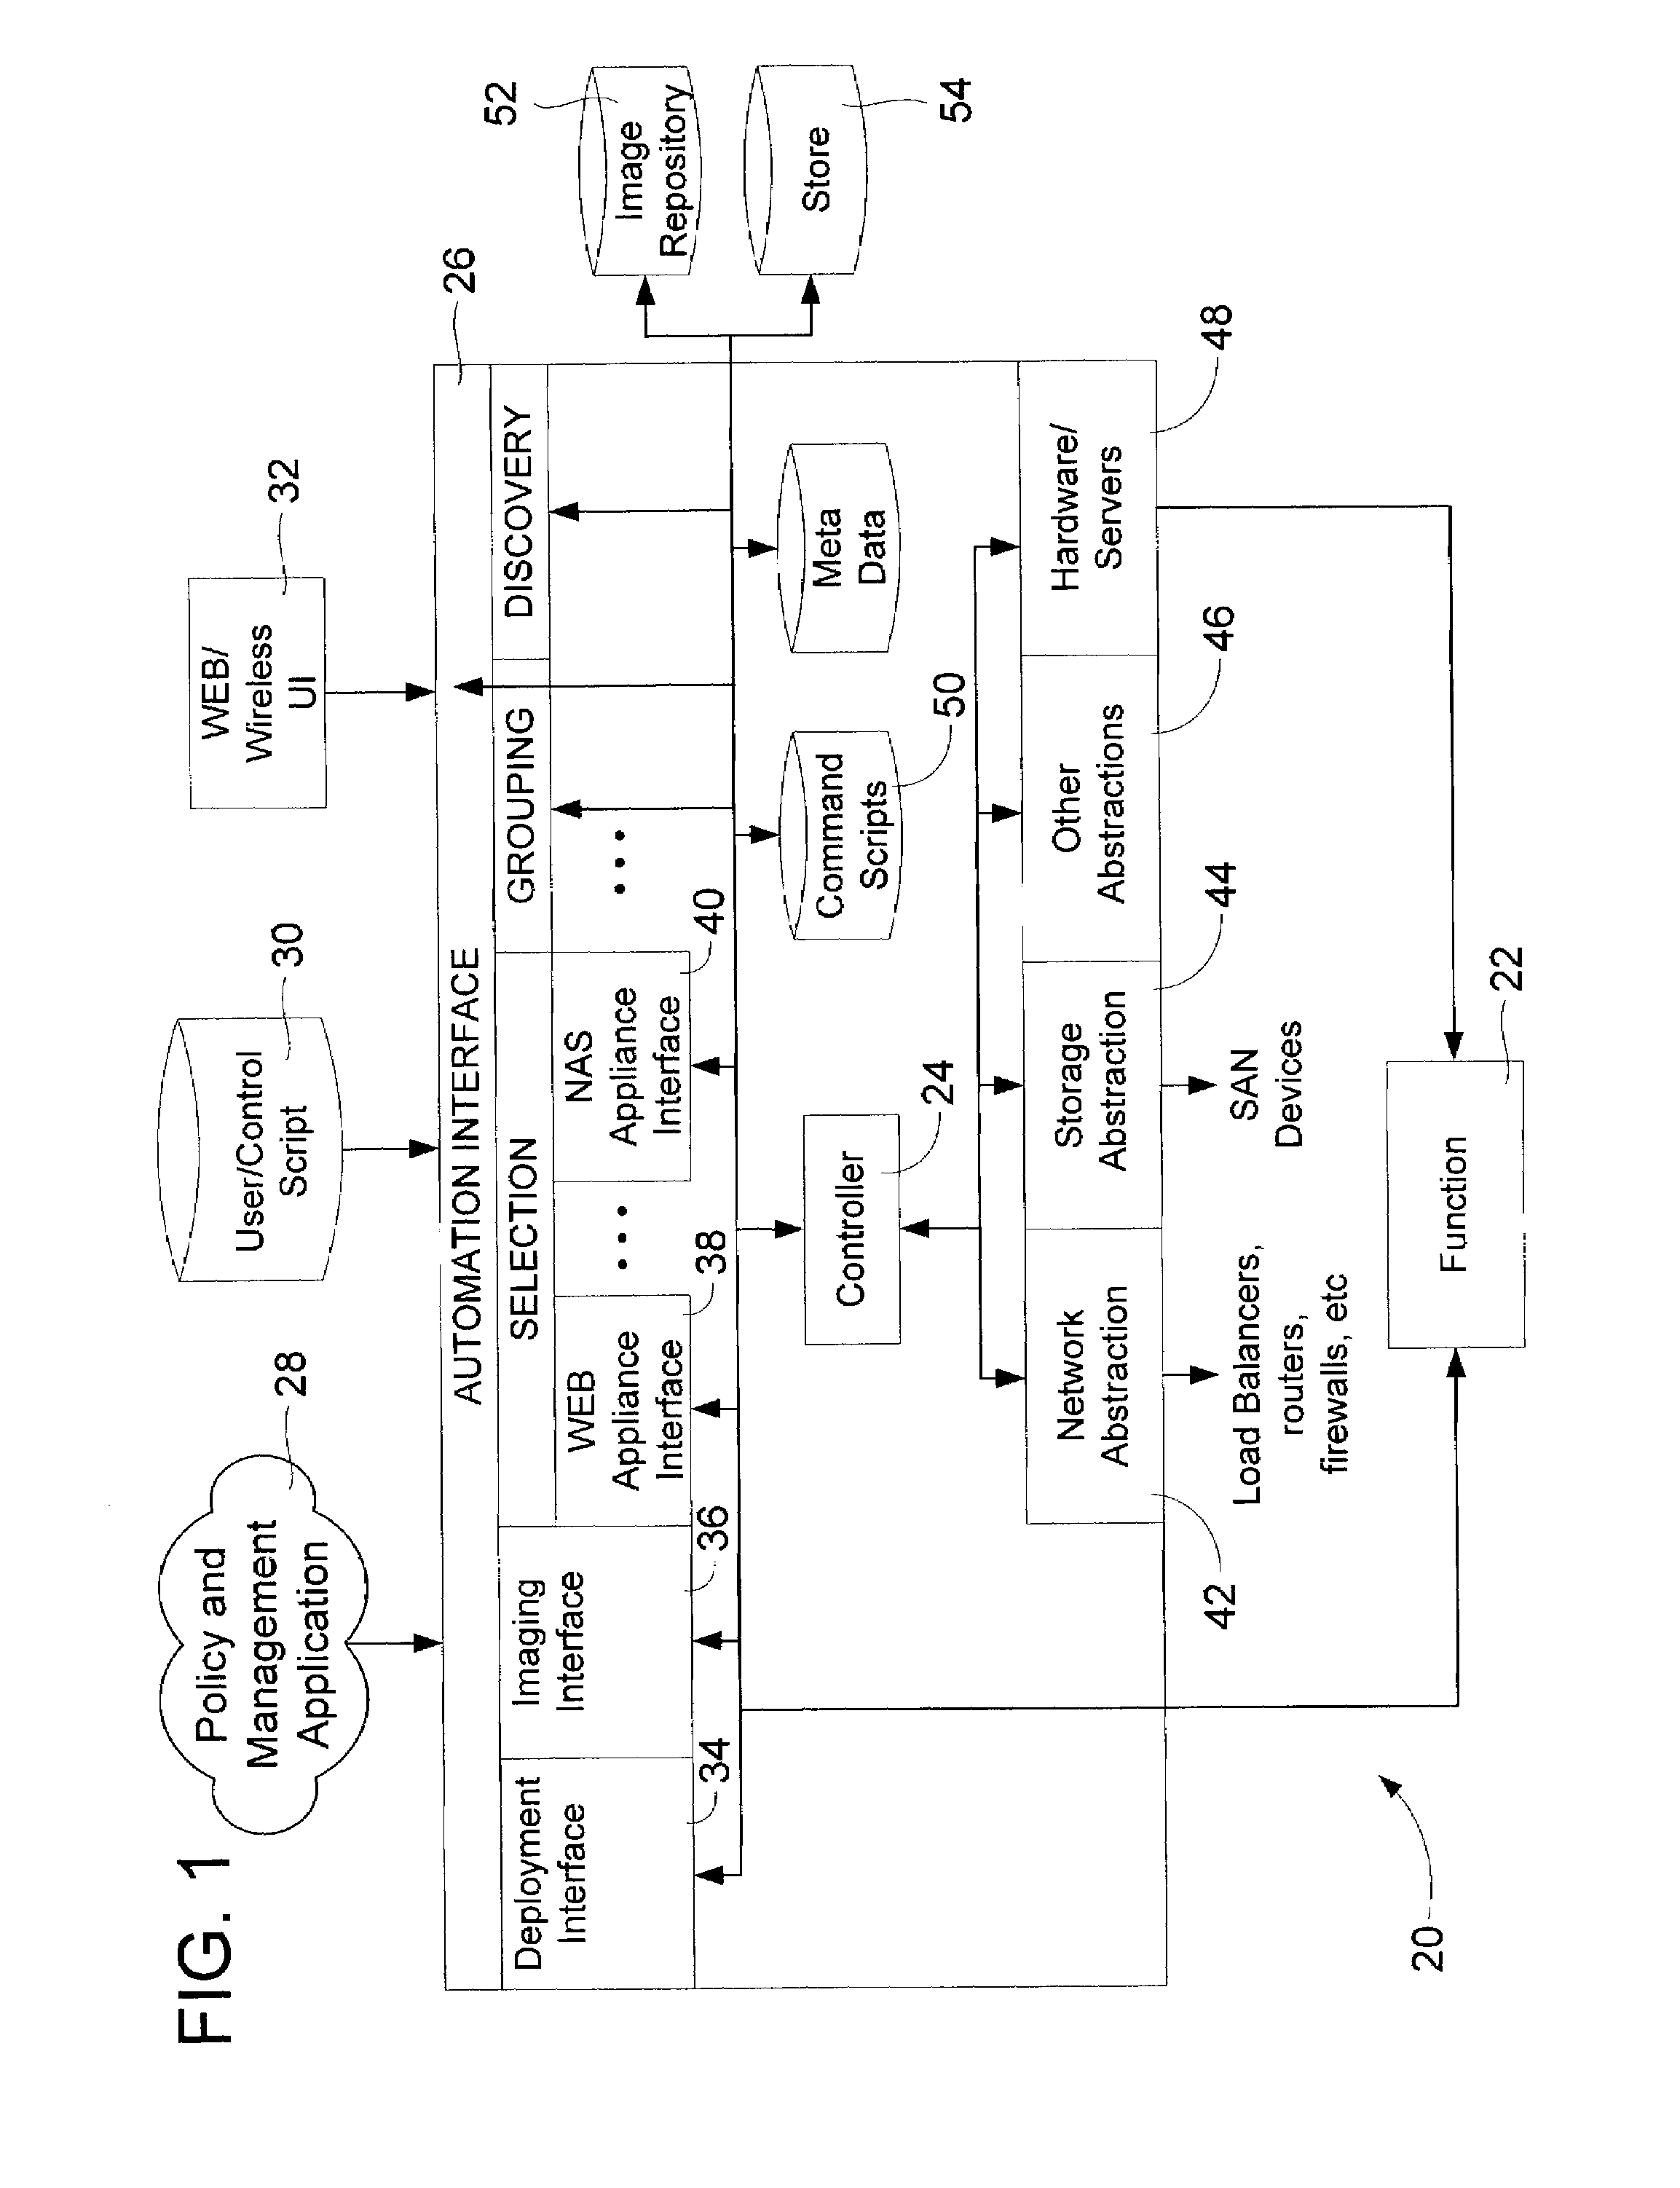 System and method to automate the management of computer services and programmable devices